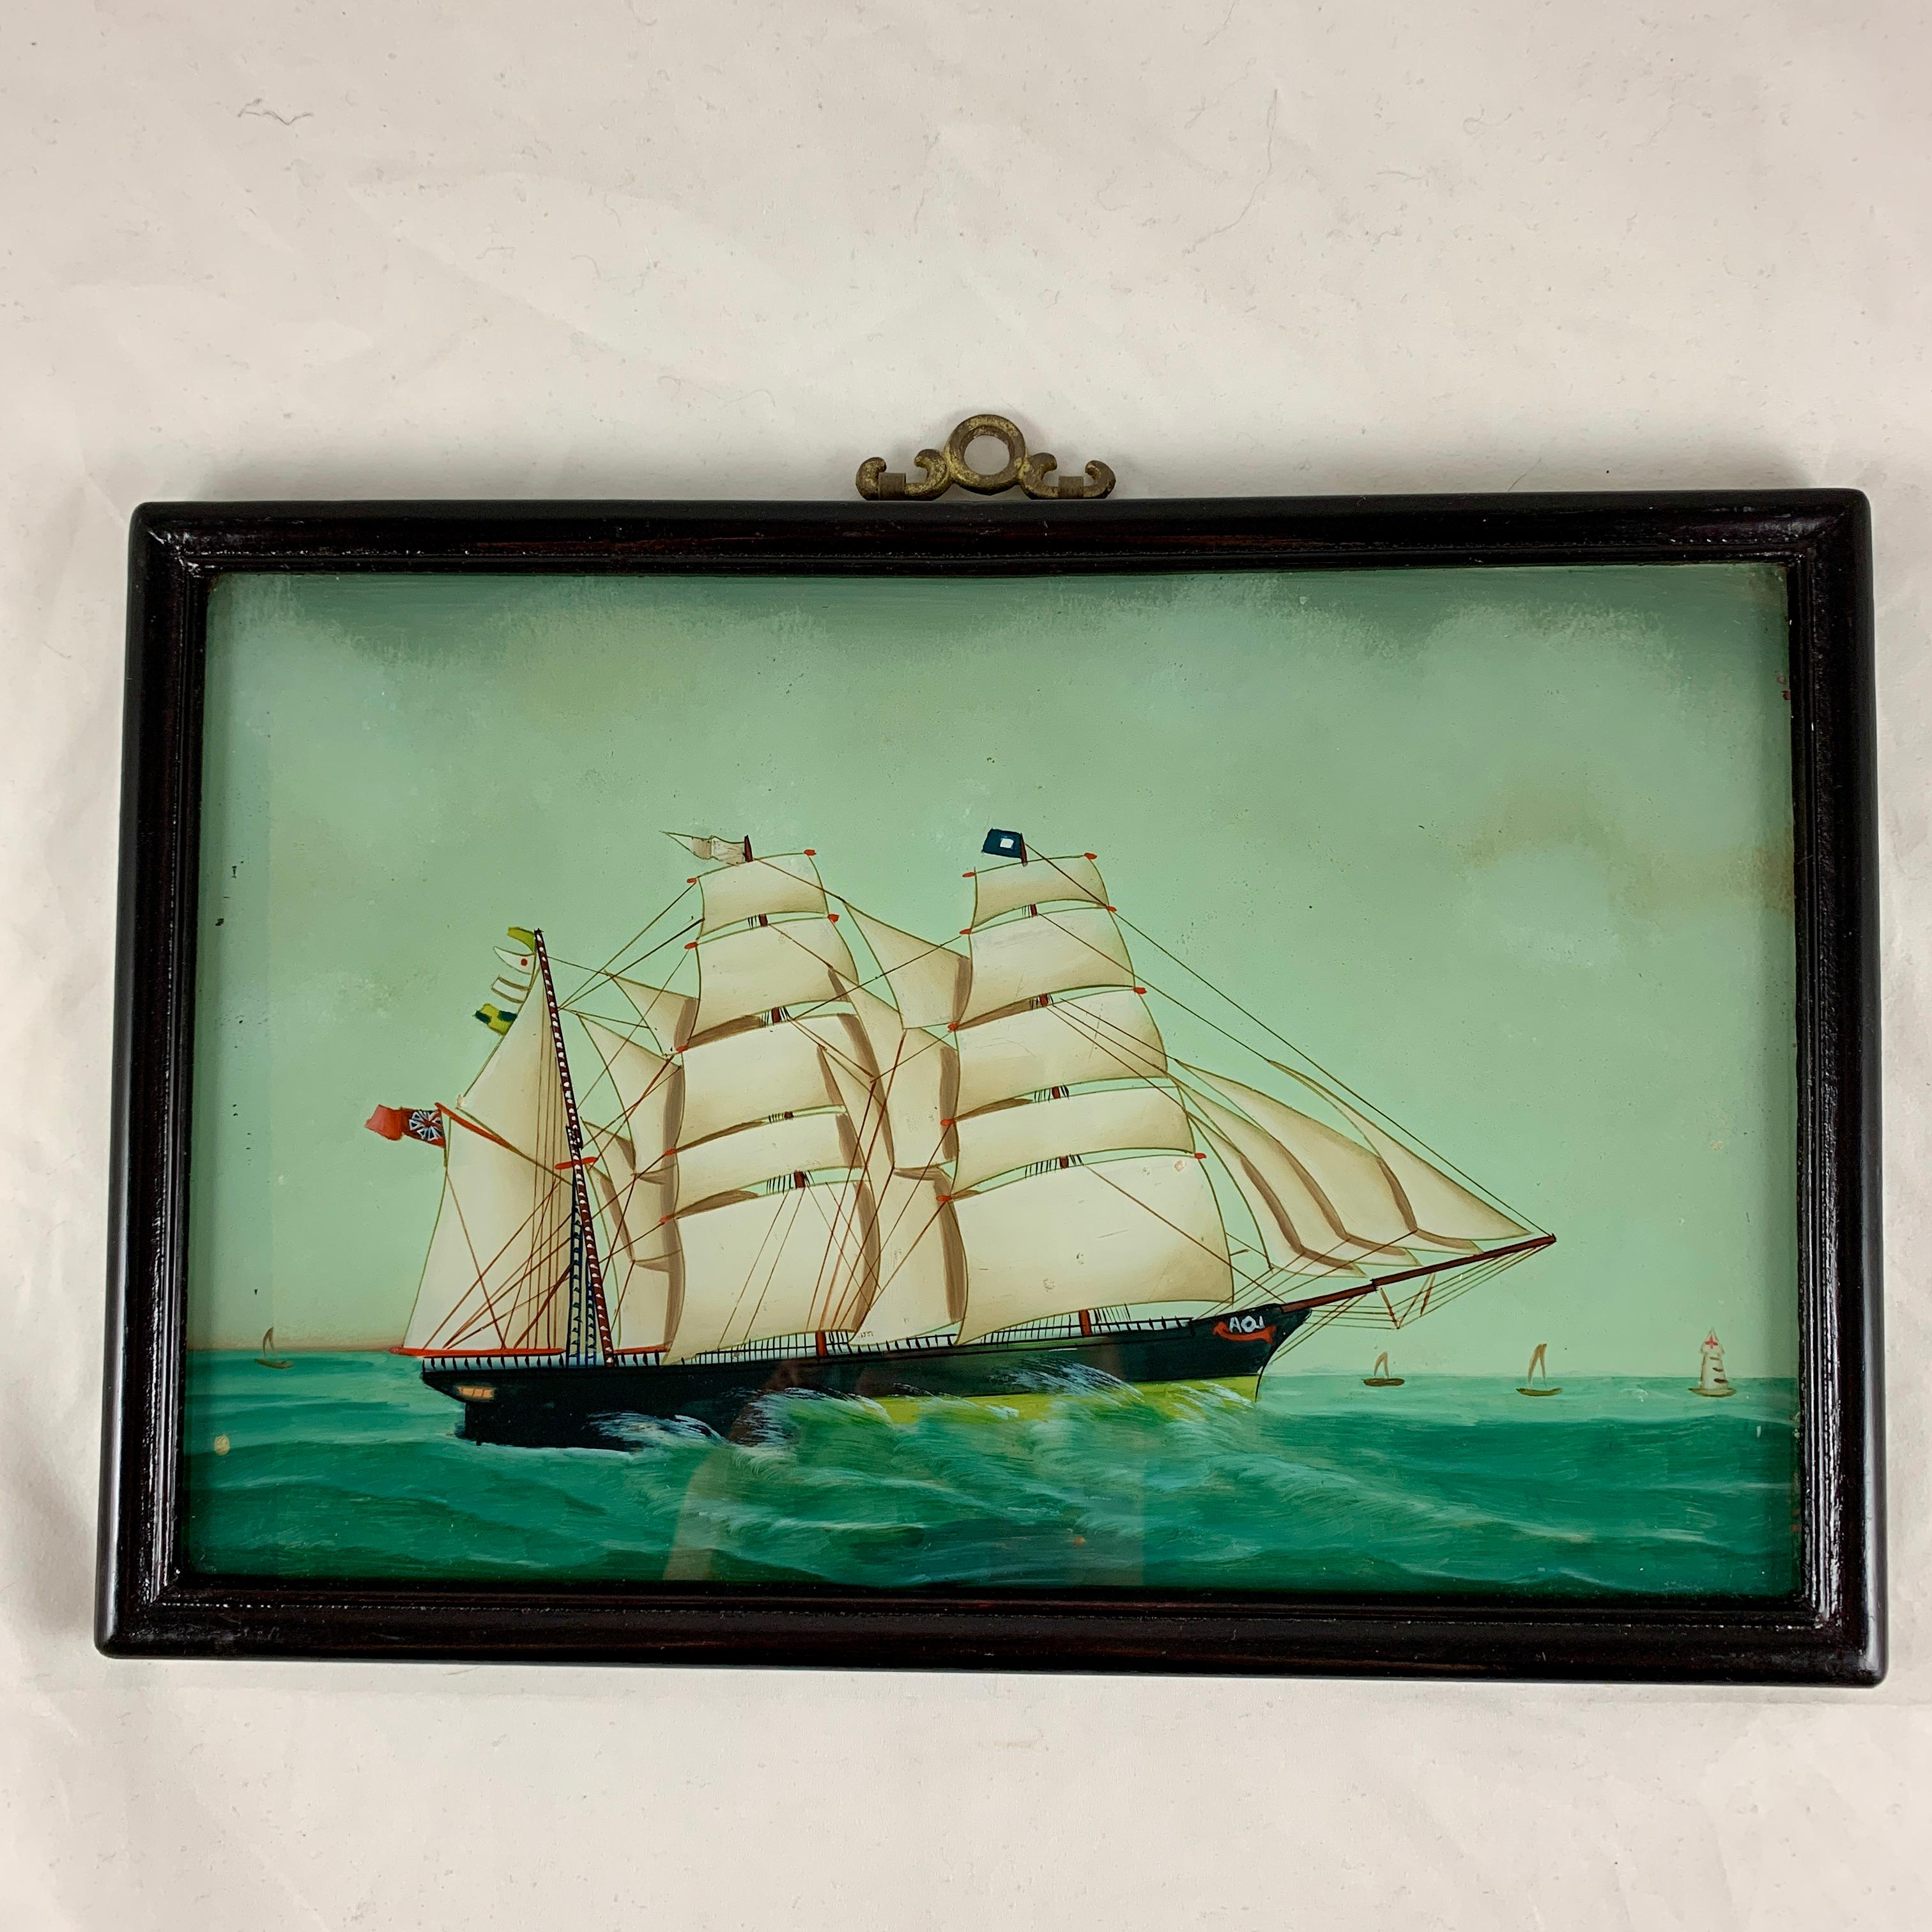 From France, a nautical theme reverse glass painting of a 19th century Frigate under full sail on the sea – “Frigate Sur la Mer.” circa late 19th – early 20th century.

Reverse painting on glass is a traditional art form where the artist applies